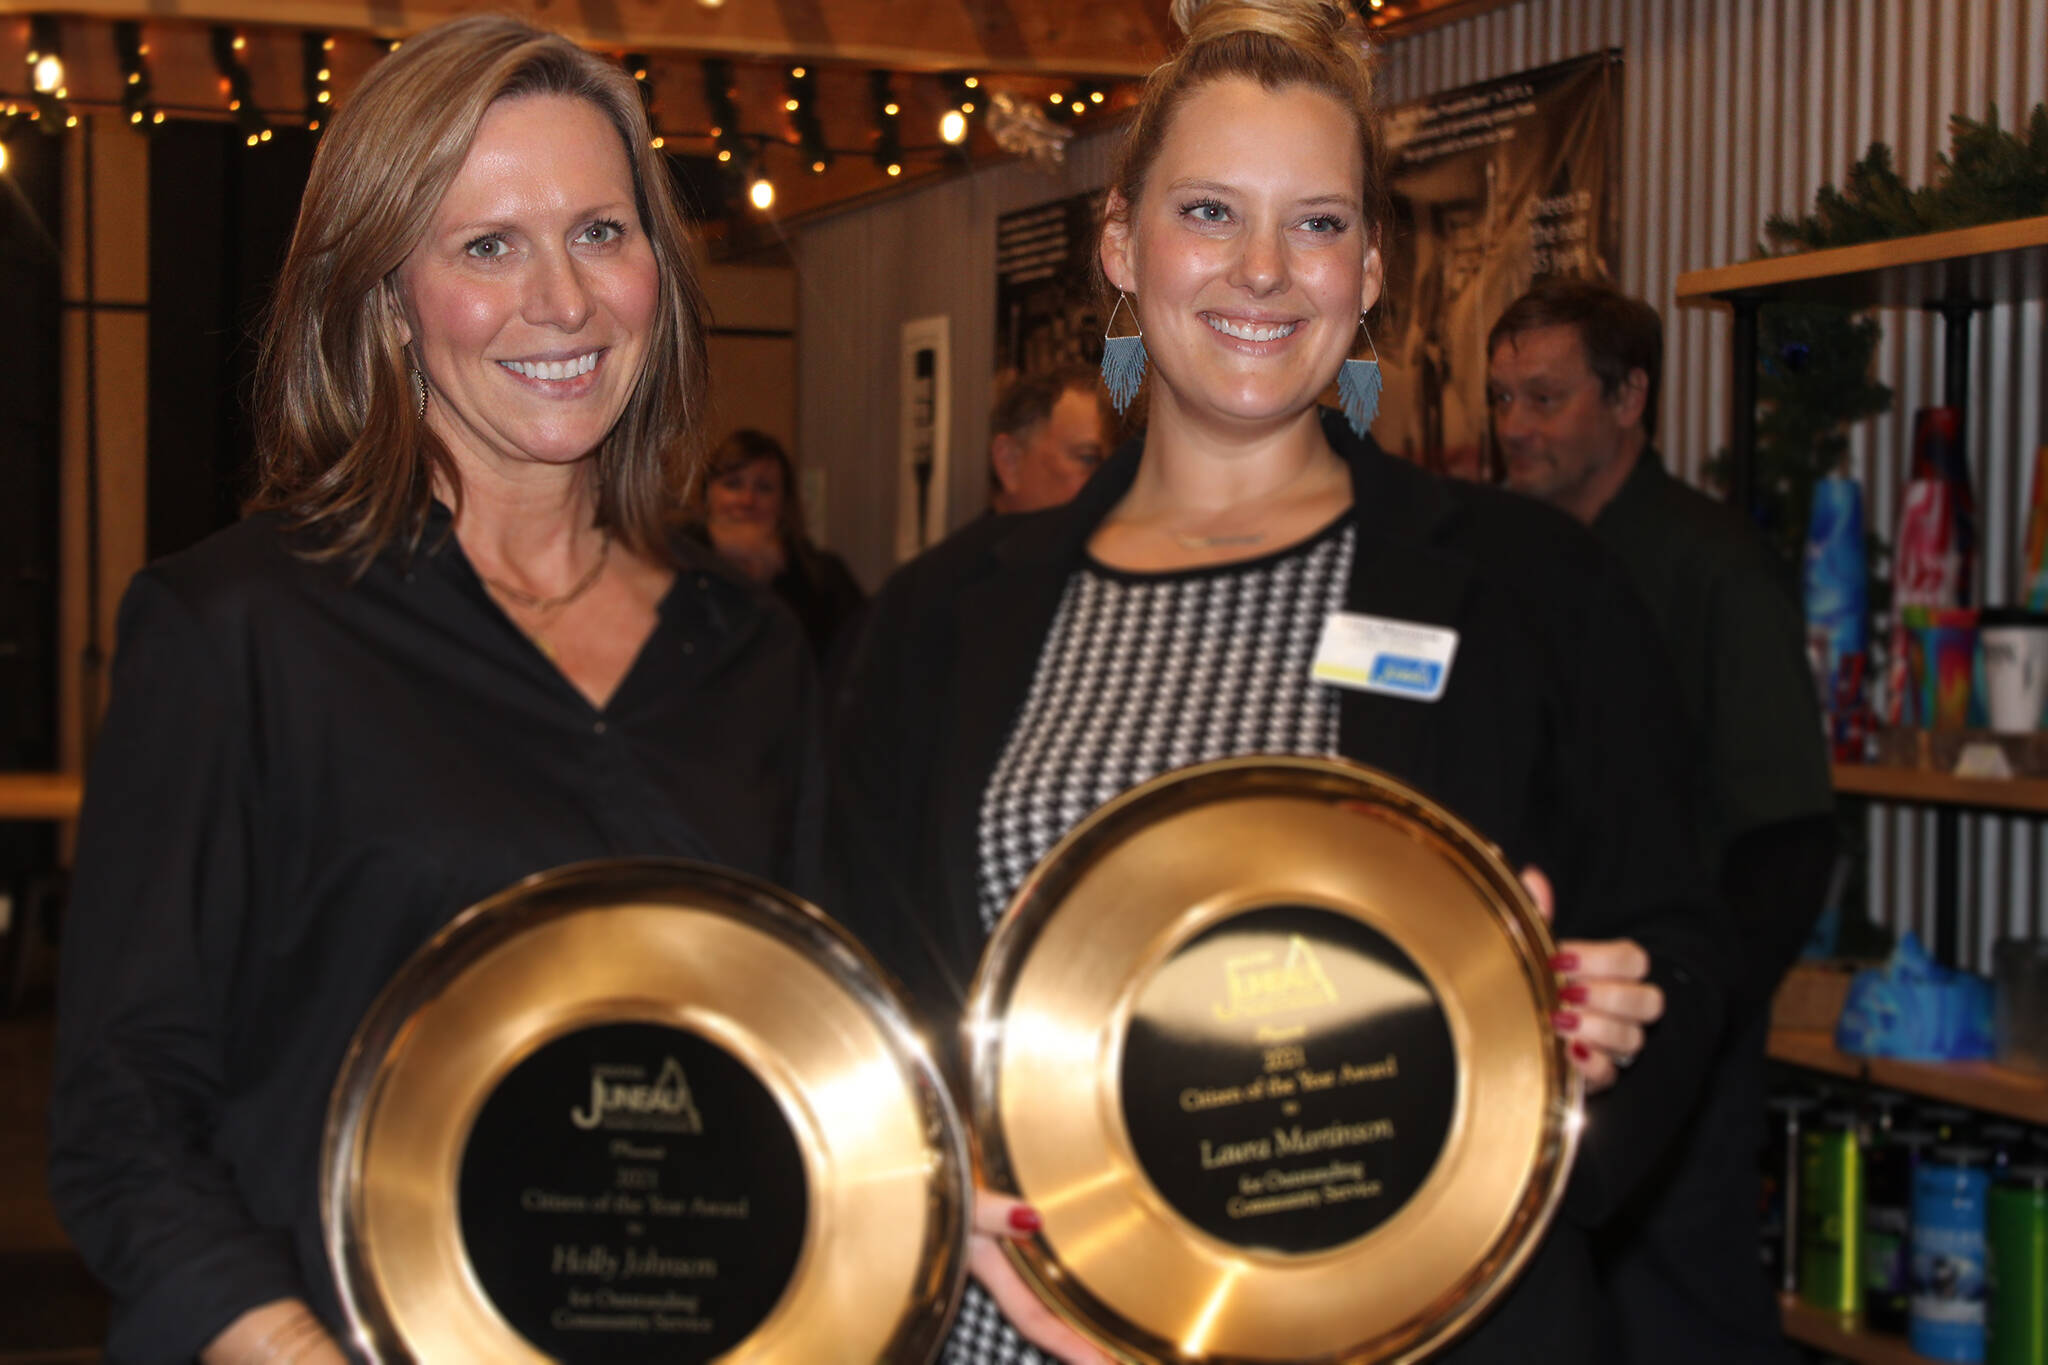 Holly Johnson, left, and Laura Martinson were named Juneau's Citizens of the year on Thursday night. Martinson, who owns Caribou Crossings, and Johnson, president of Wings Airways, received the award in recognition of their leadership of the Protect Juneau’s Future committee. (Dana Zigmund/Juneau Empire)